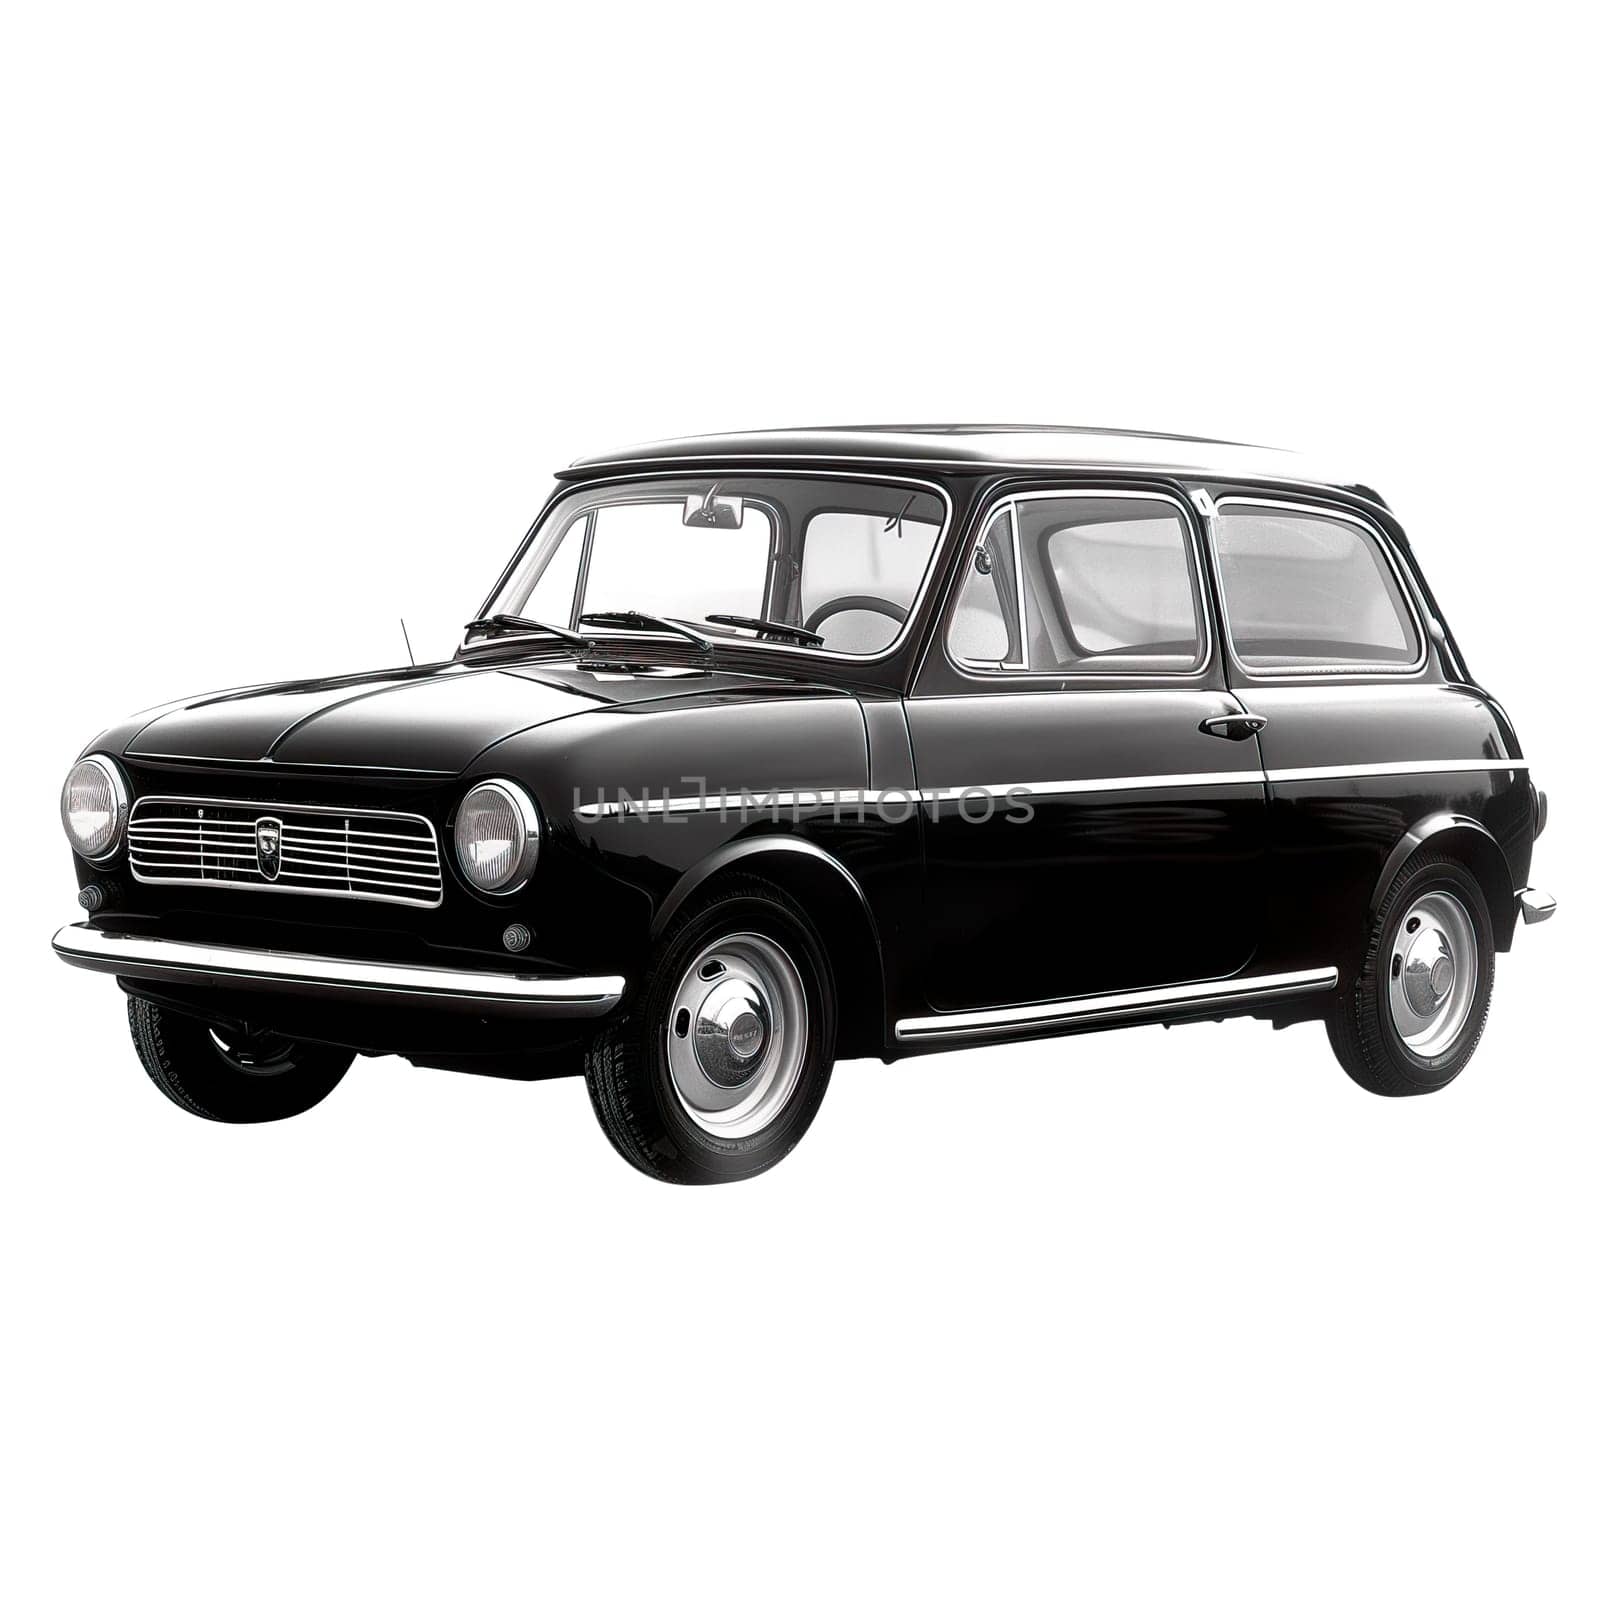 European vintage compact car black and white isolated photo by Dustick